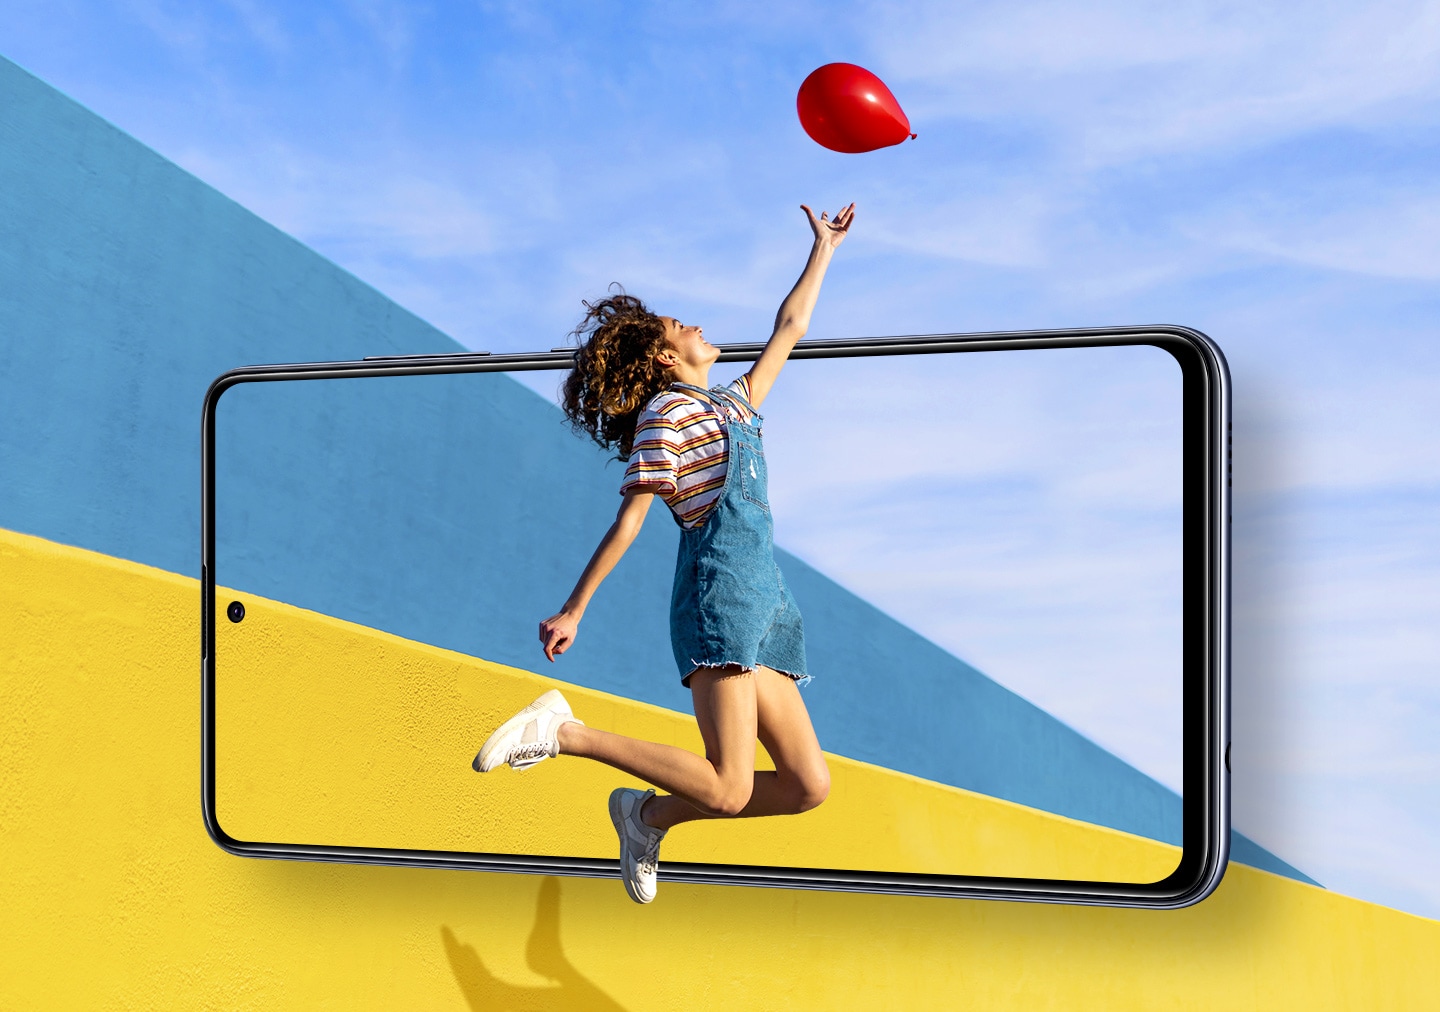 Discover Samsung A51 5G price in the Philippines. Experience a big screen at a small price with an Infinity-O Display and a 6.5' FHD+ widescreen display